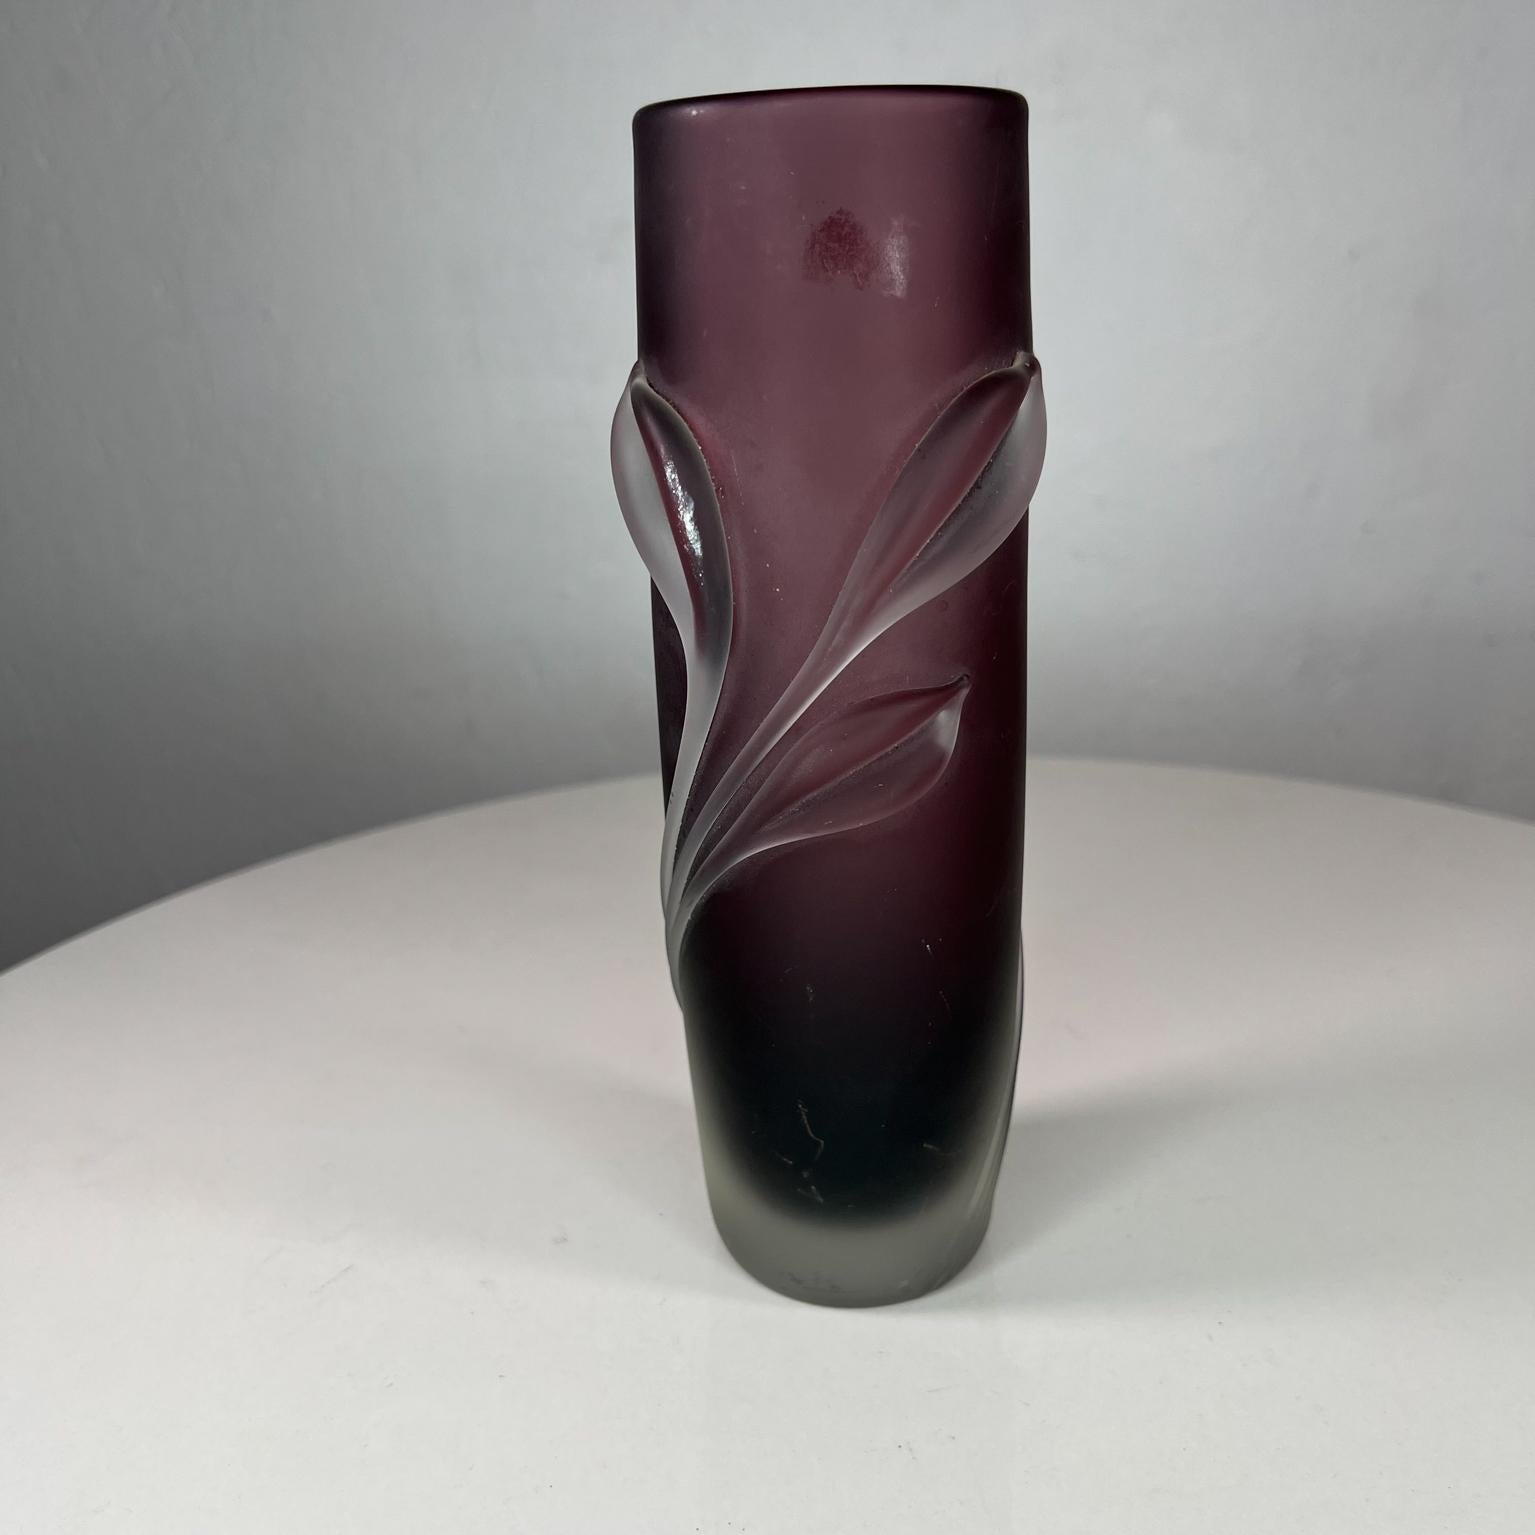 1980s Modern Satin Sheen frosted Art Glass purple vase by William Glasner, New York
Signed and numbered
8.75 tall x 3.25 diameter
Preowned original unrestored vintage condition.
See images provided.
 